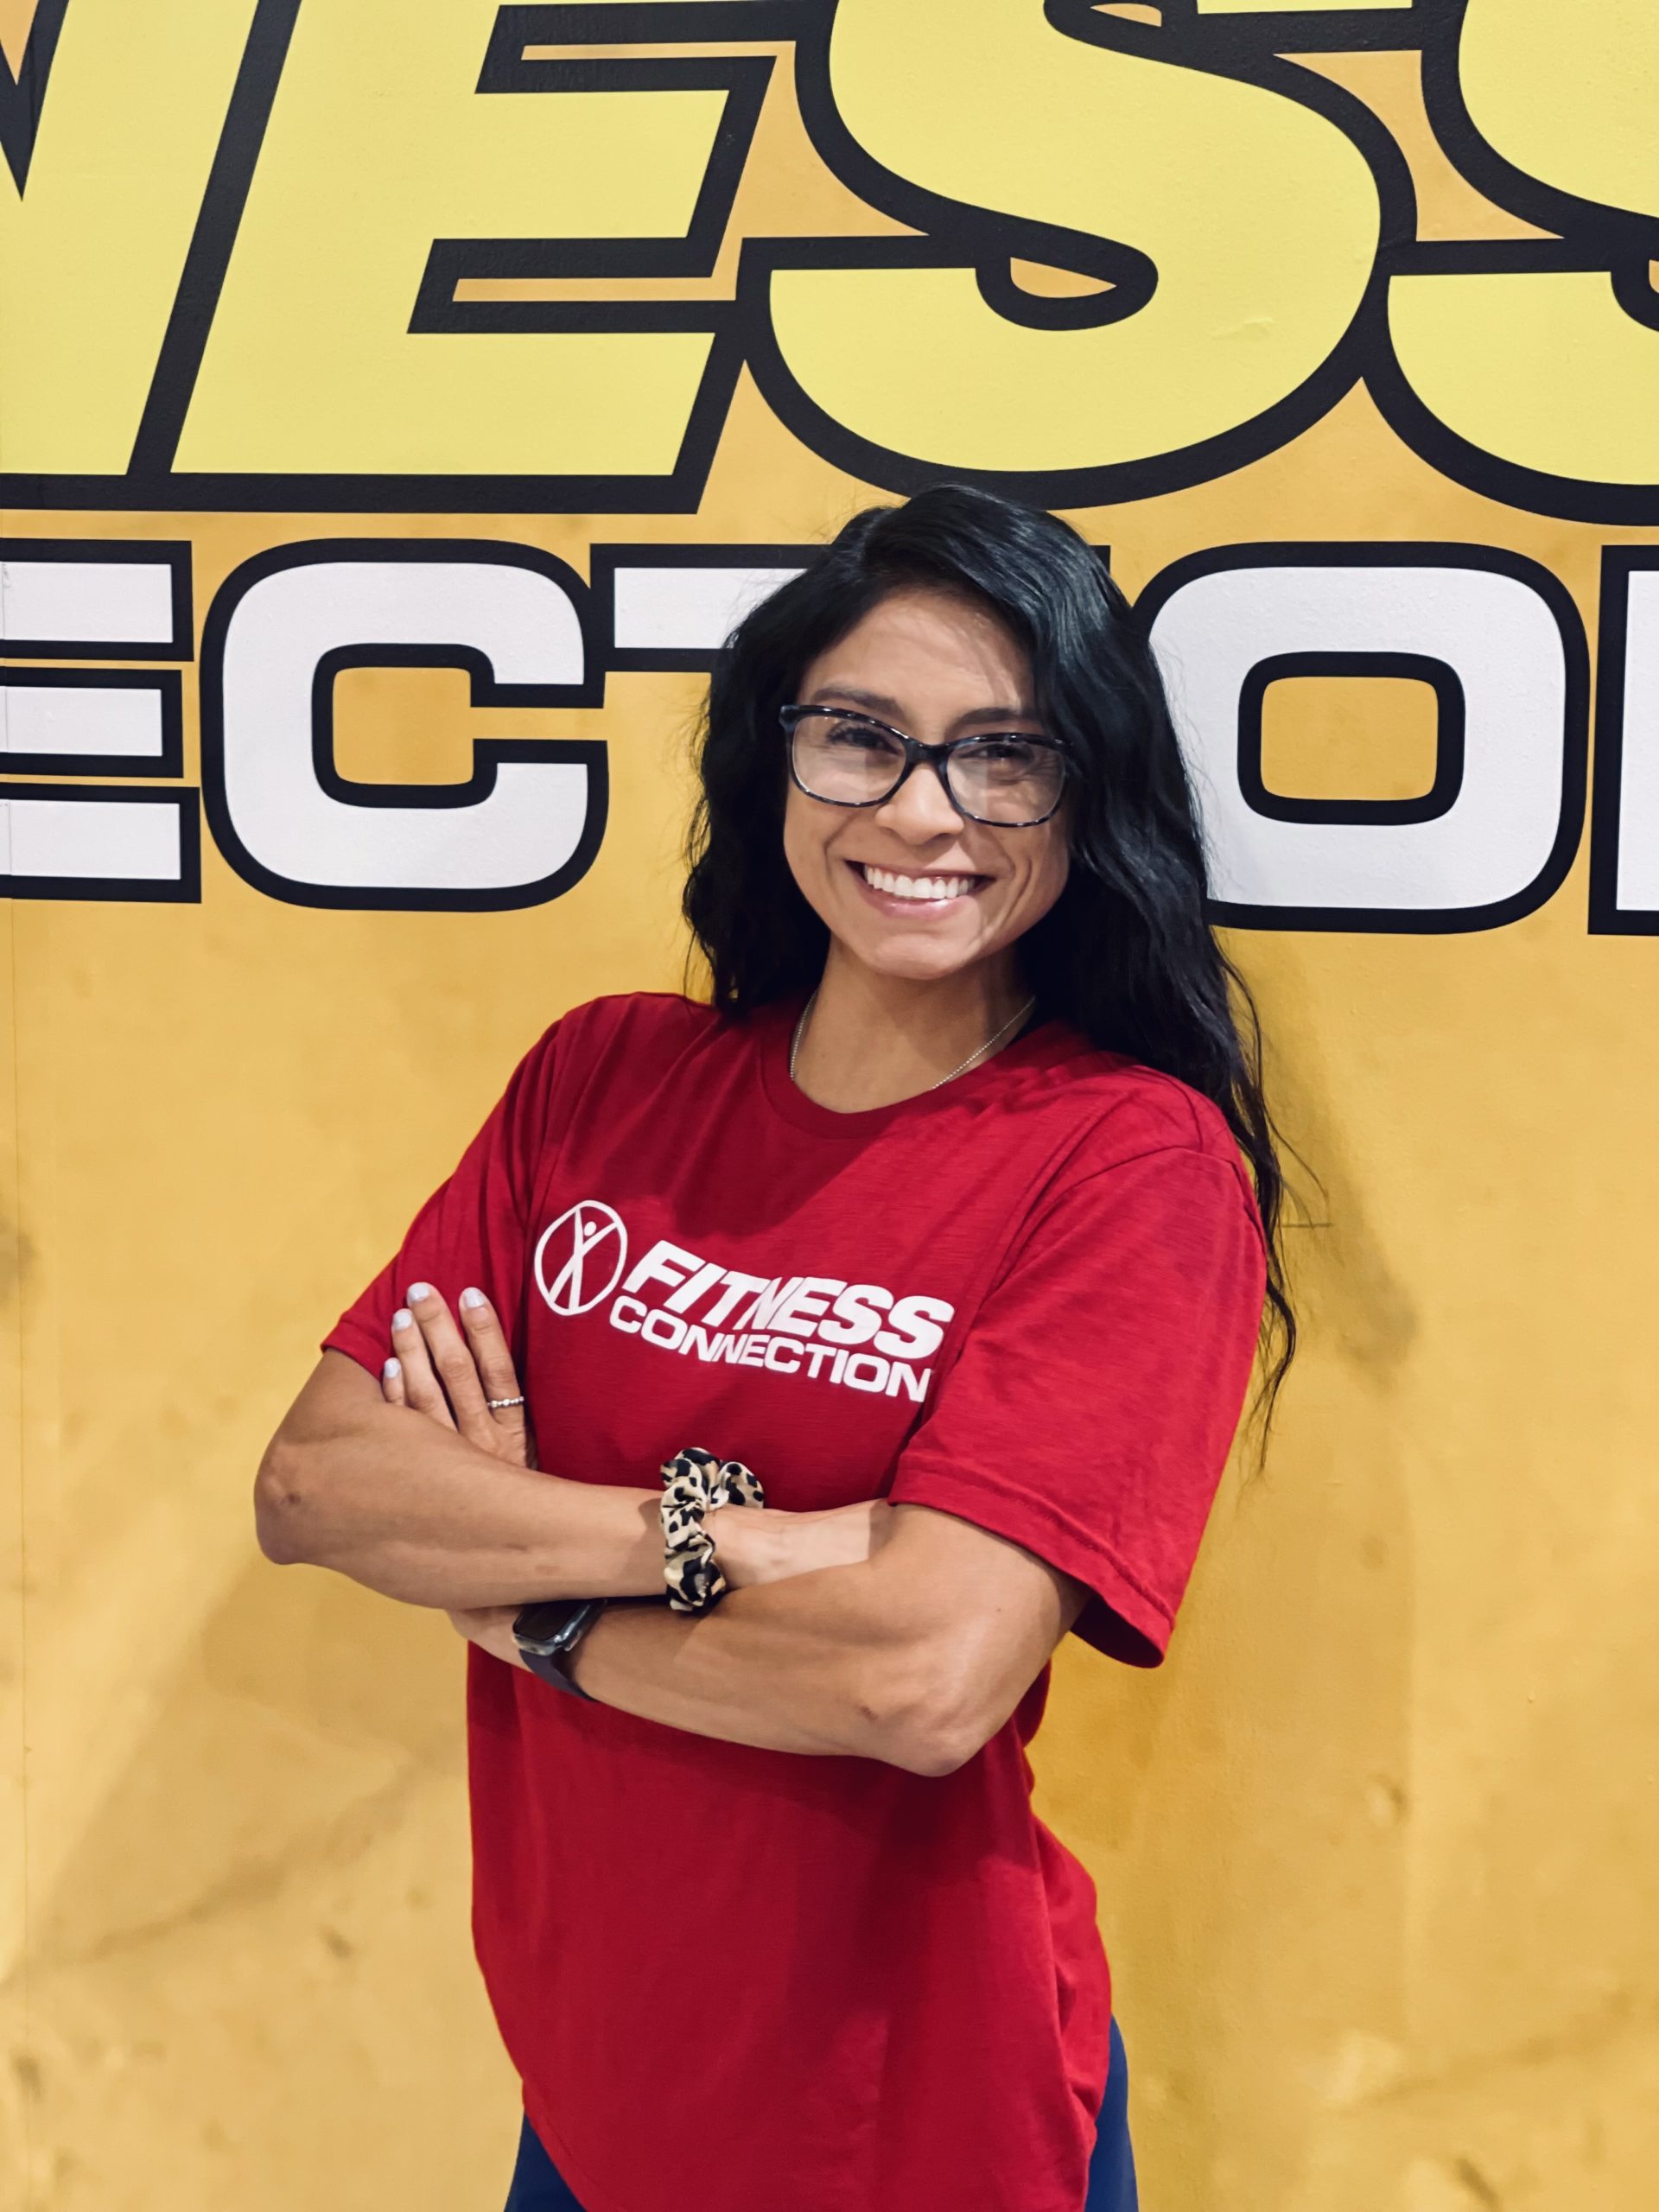 Bre M. Fitness Connection Club Manager